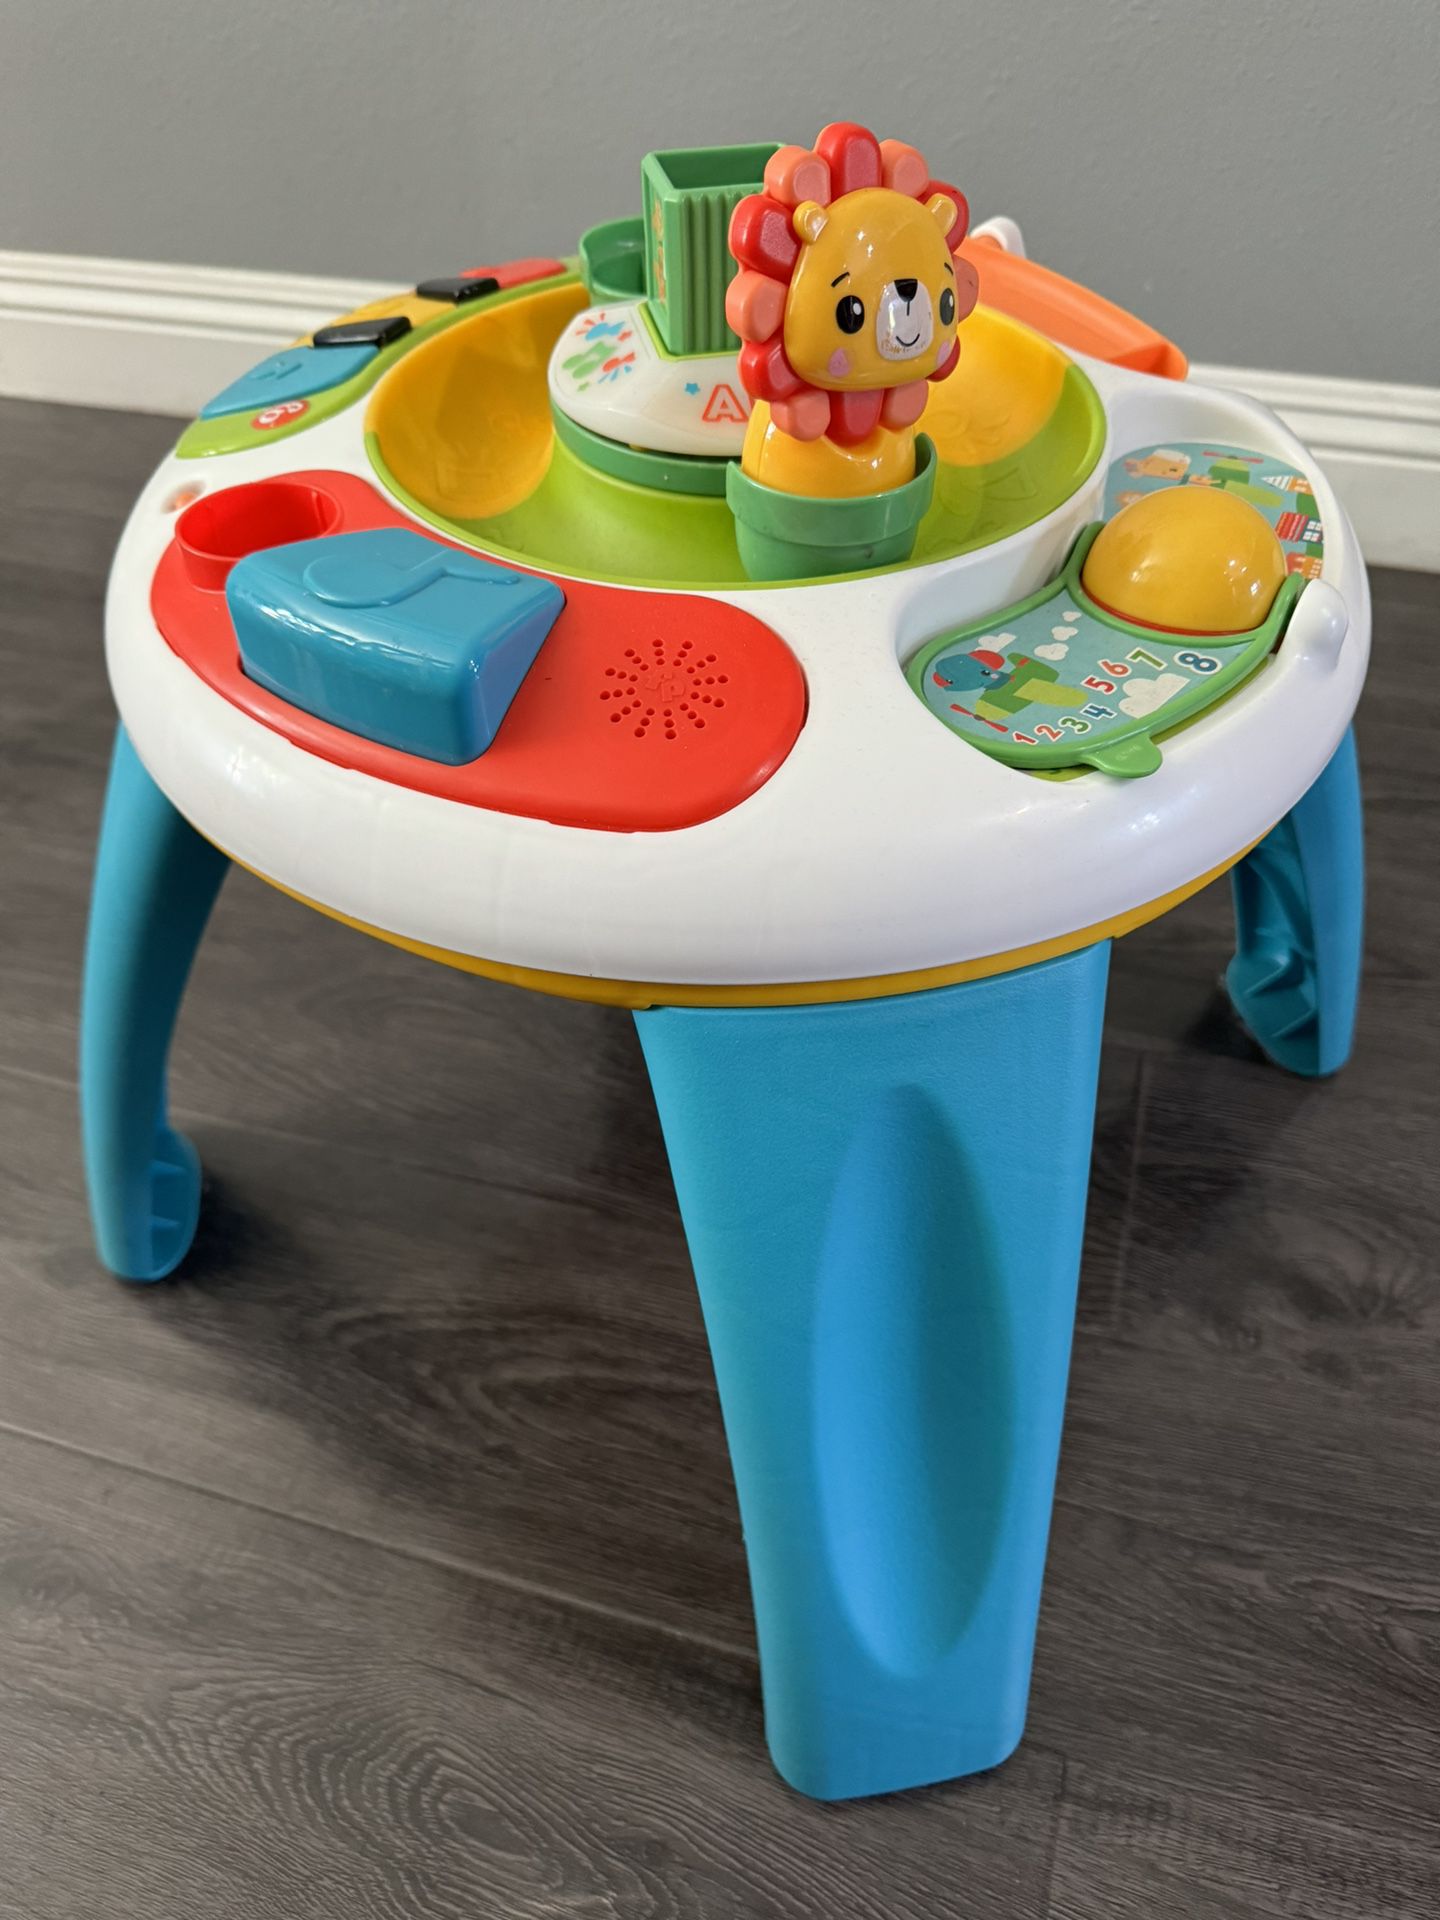 $10-Used Baby To Toddler Playing Toy 